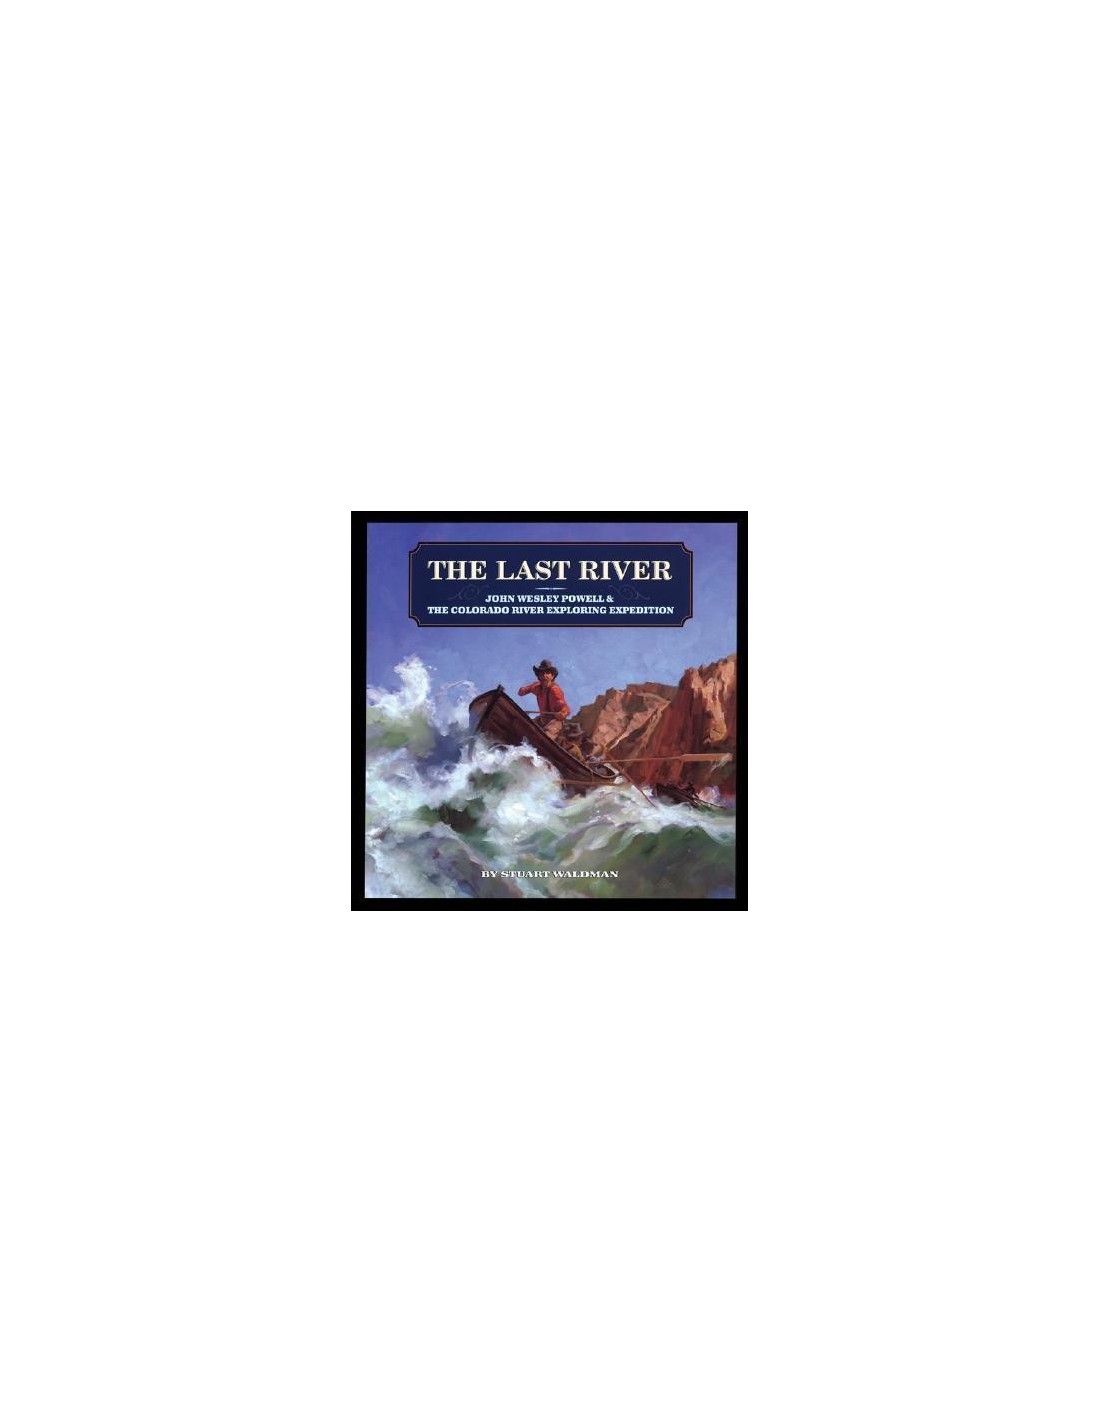 The Last River : John Wesley Powell and the Colorado River Exploring Expedition